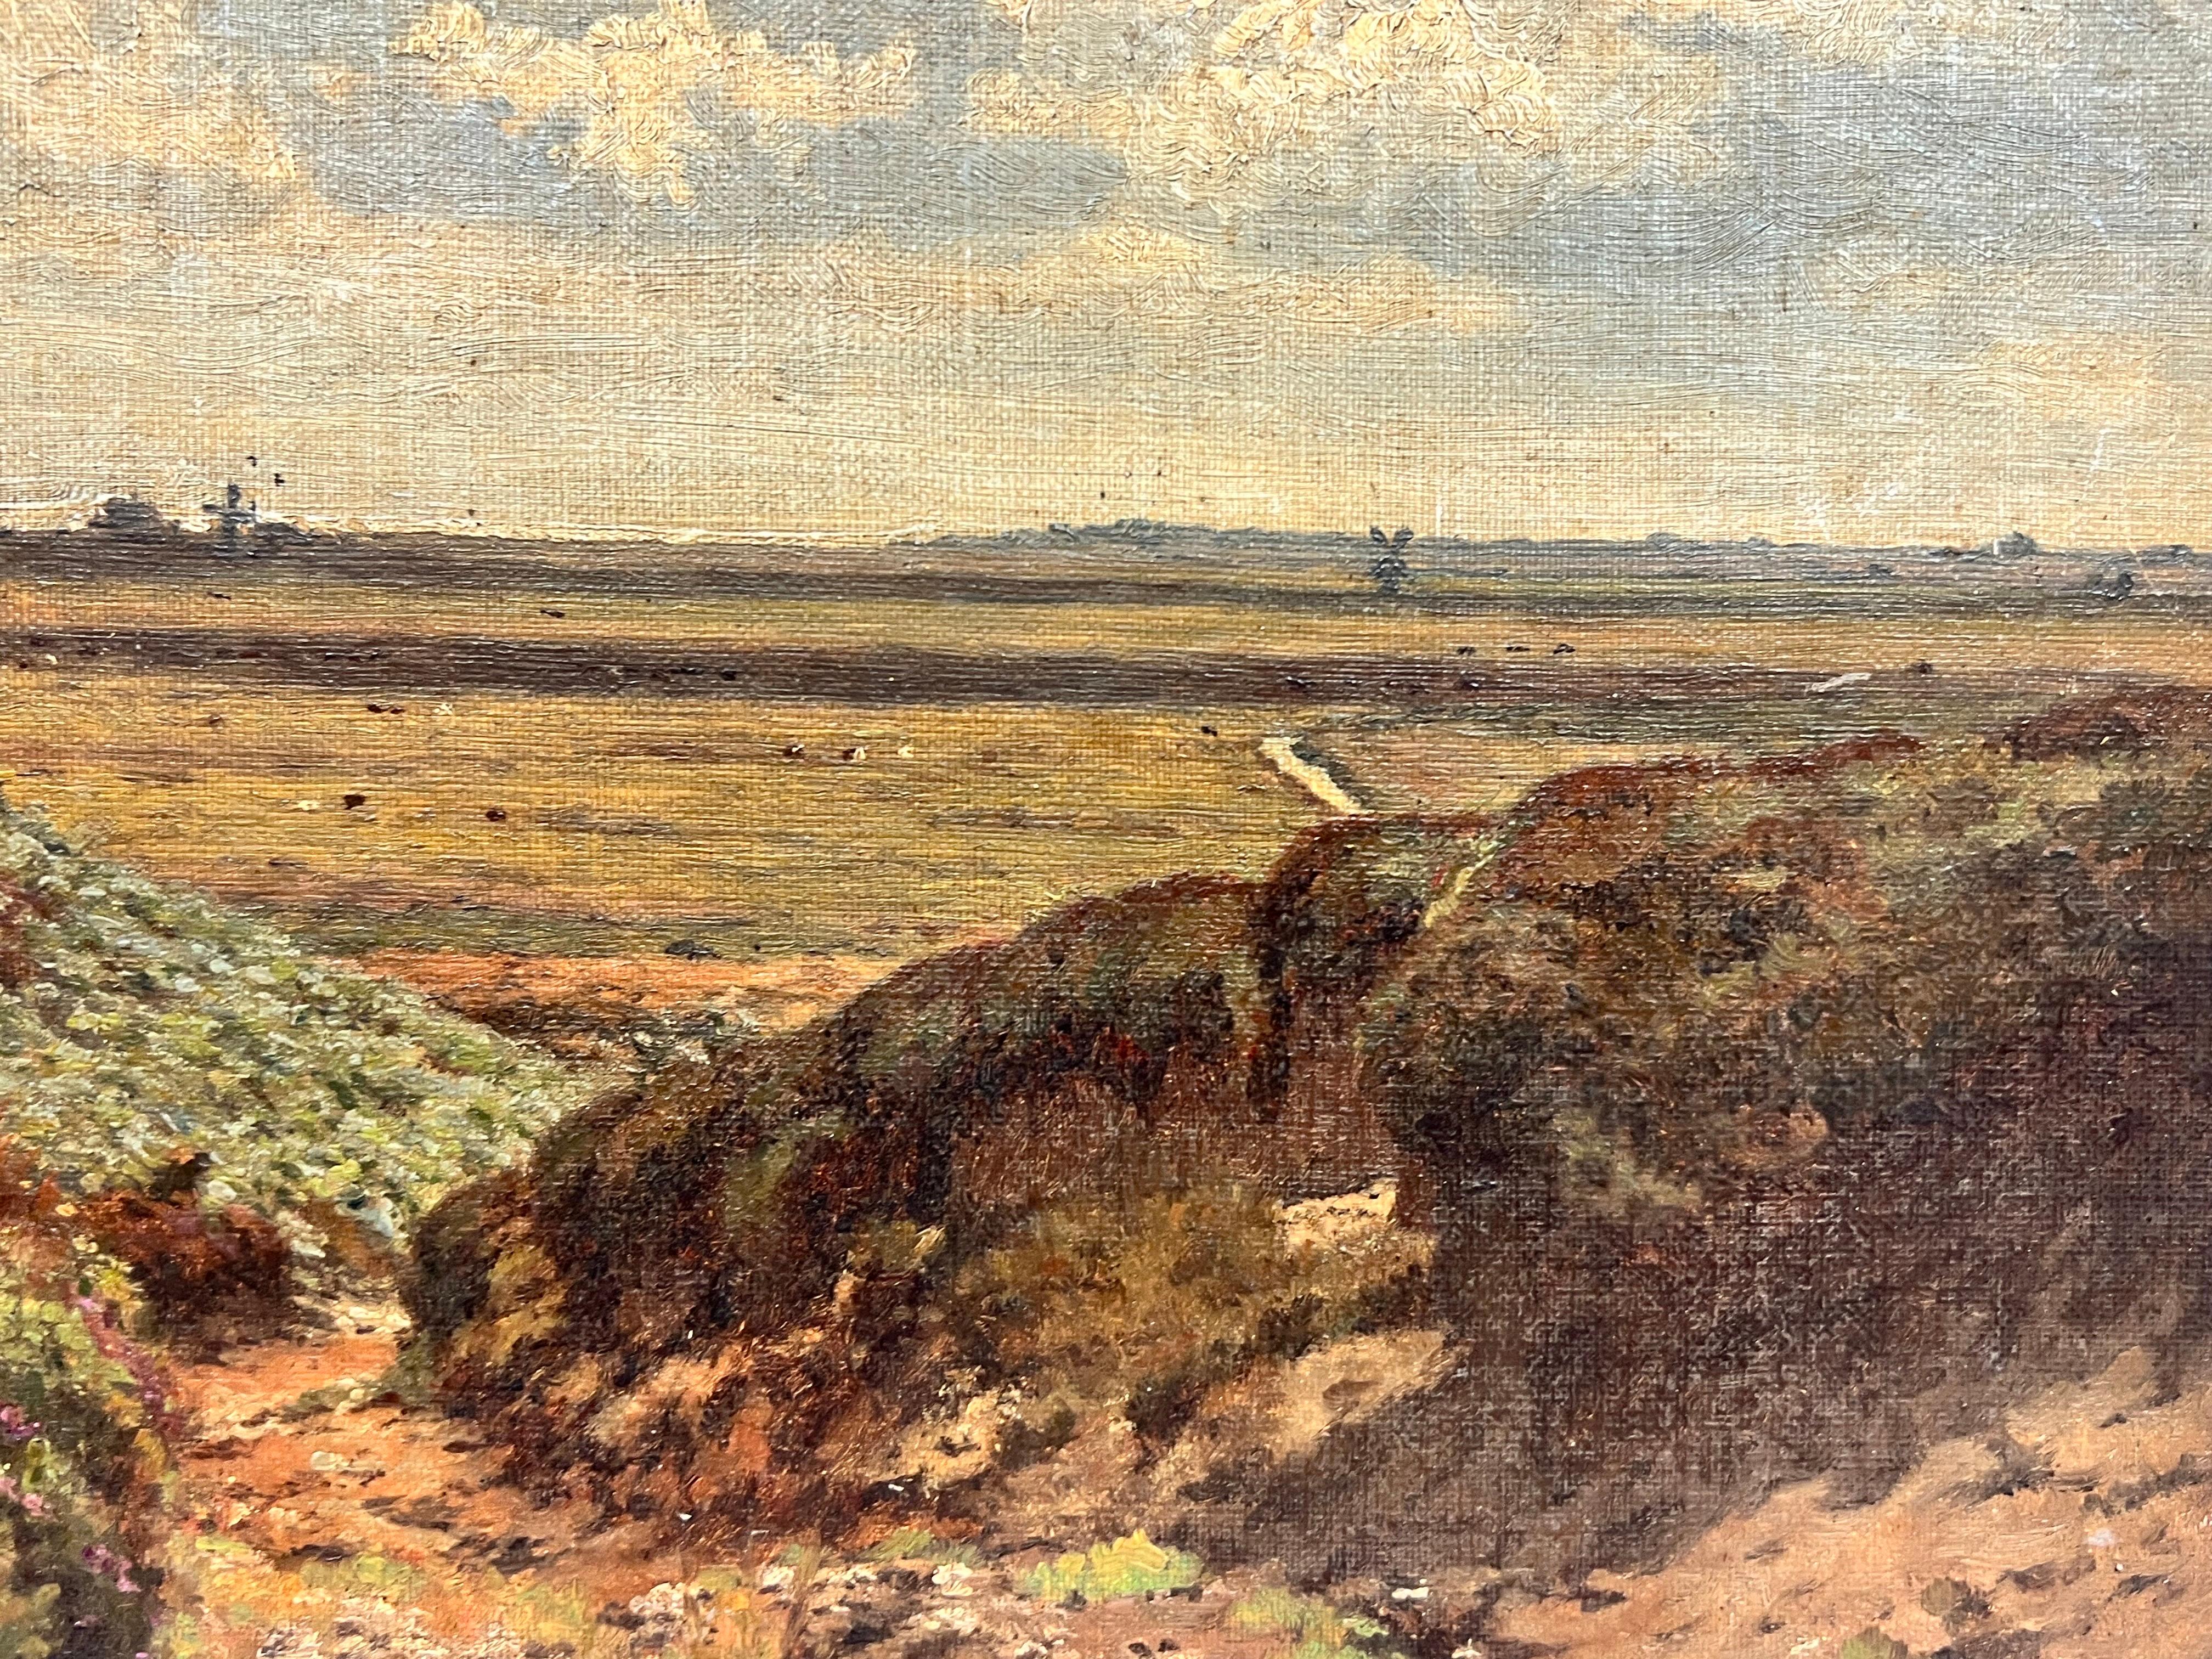 Henry Hucks Gibbs,
British 1819-1907
View of Dunwich, near Southwold (Suffolk)
oil painting on canvas, unframed
painting: 10 x 13.5 inches
provenance: private collection, England
condition: overall very sound just a little dirty in places with age. 